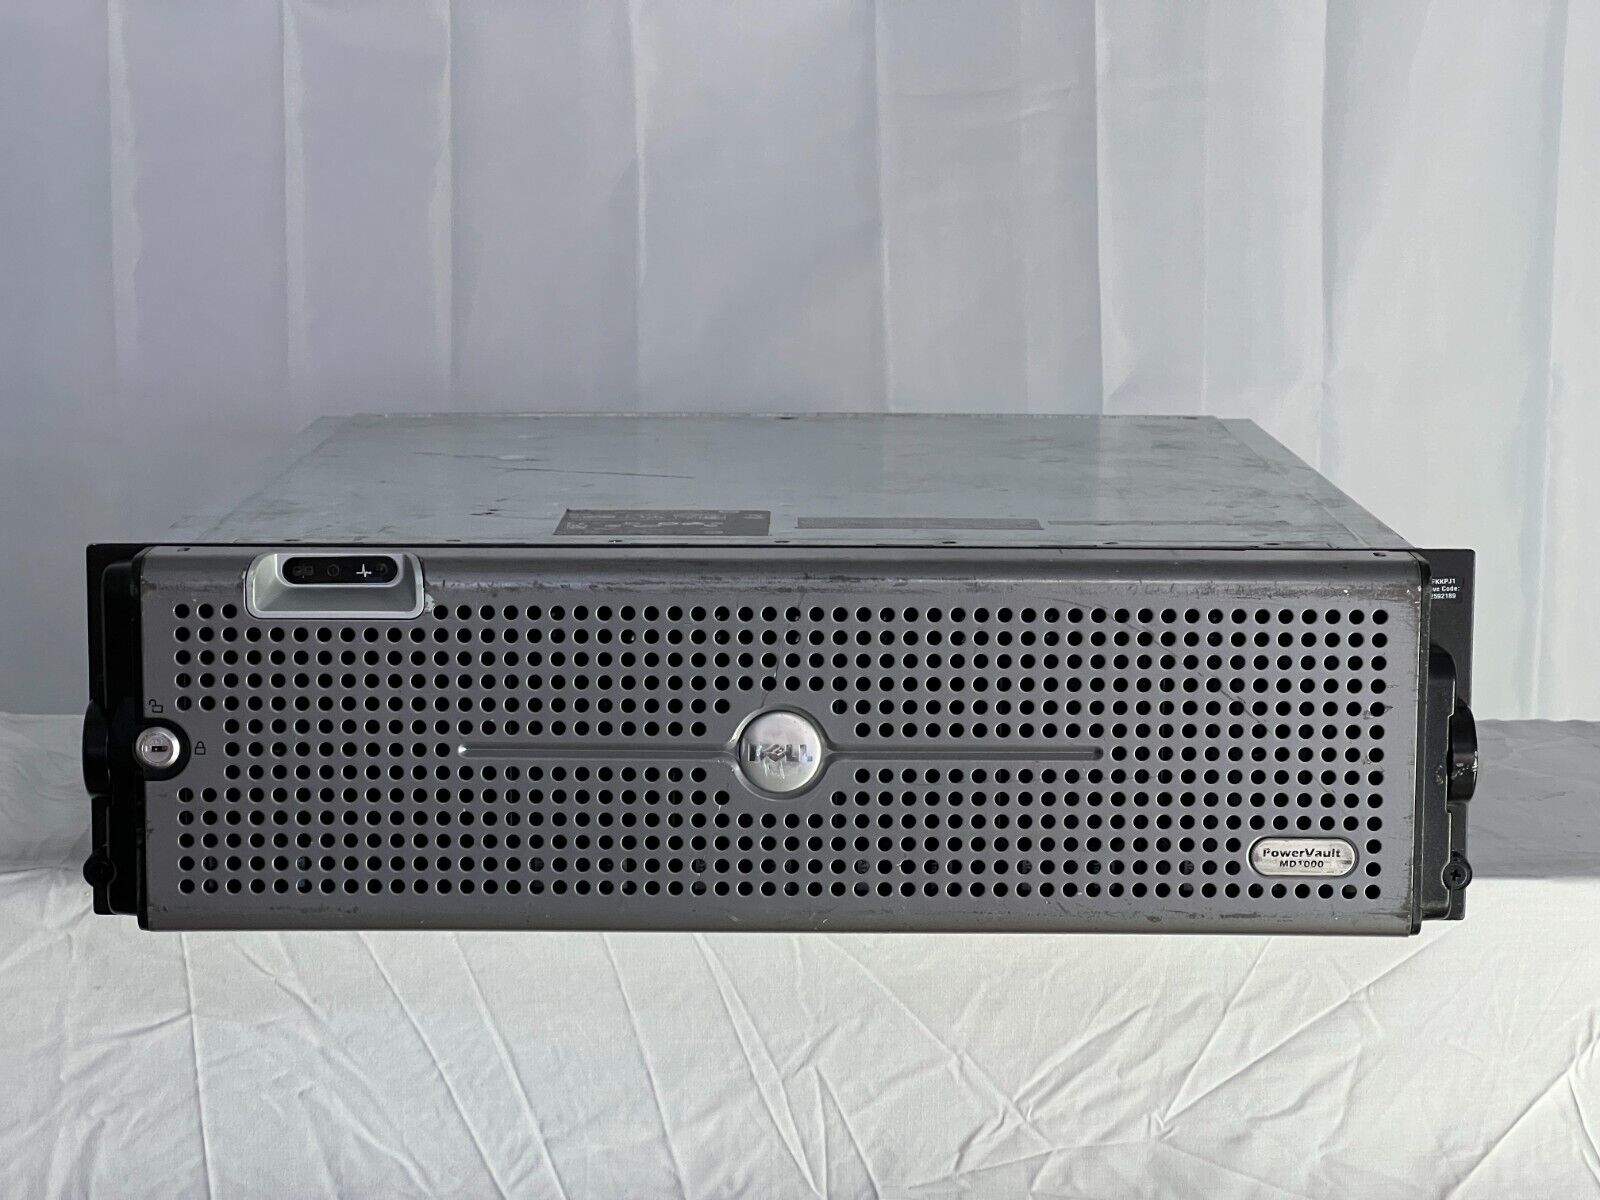 Dell PowerVault MD1000 Storage Array 15x 3.5